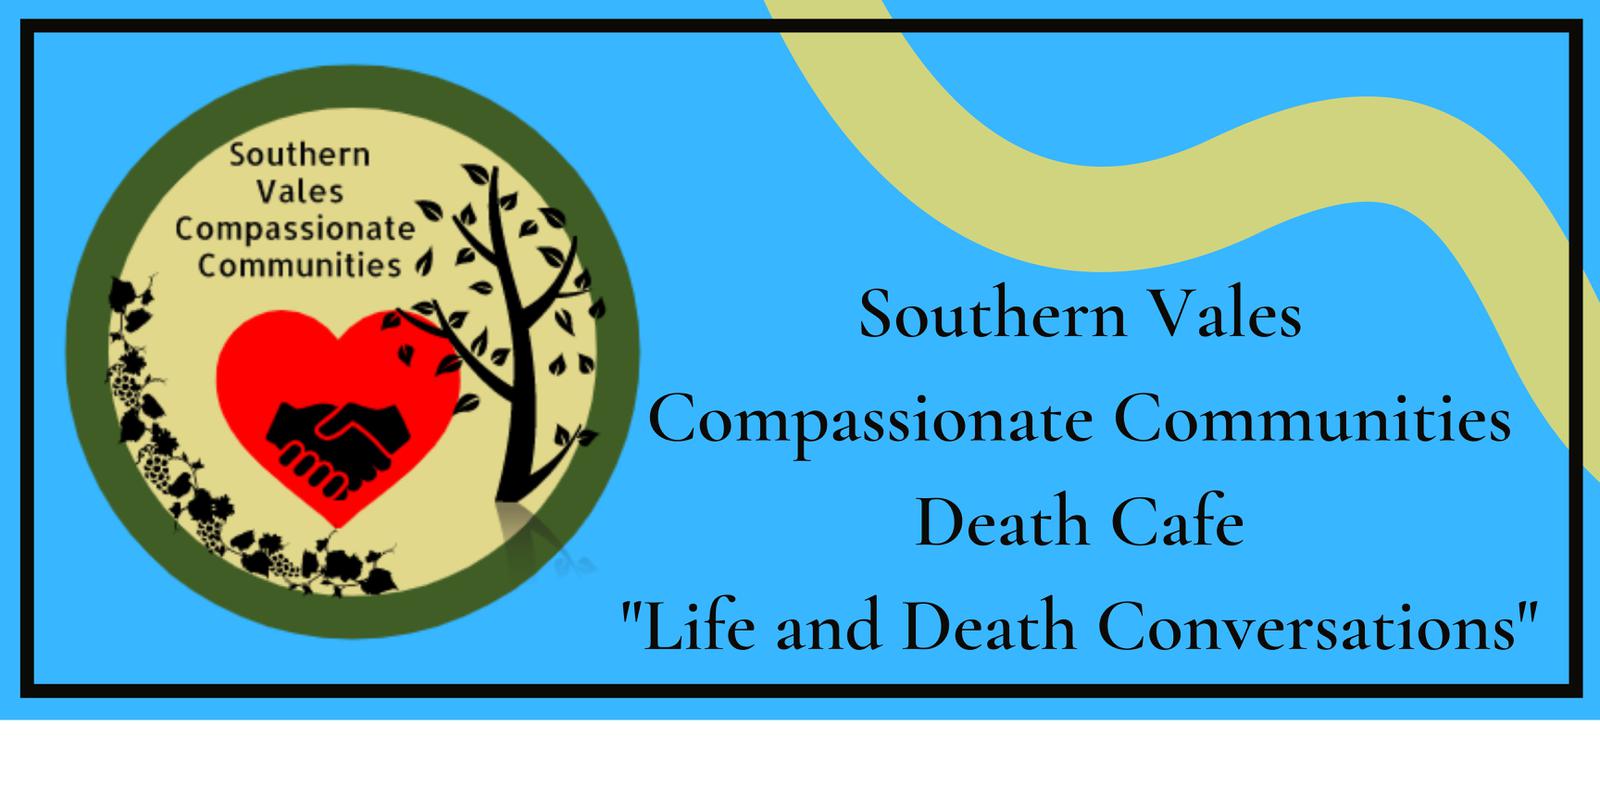 Death Cafe Southern Vales Compassionate Communities